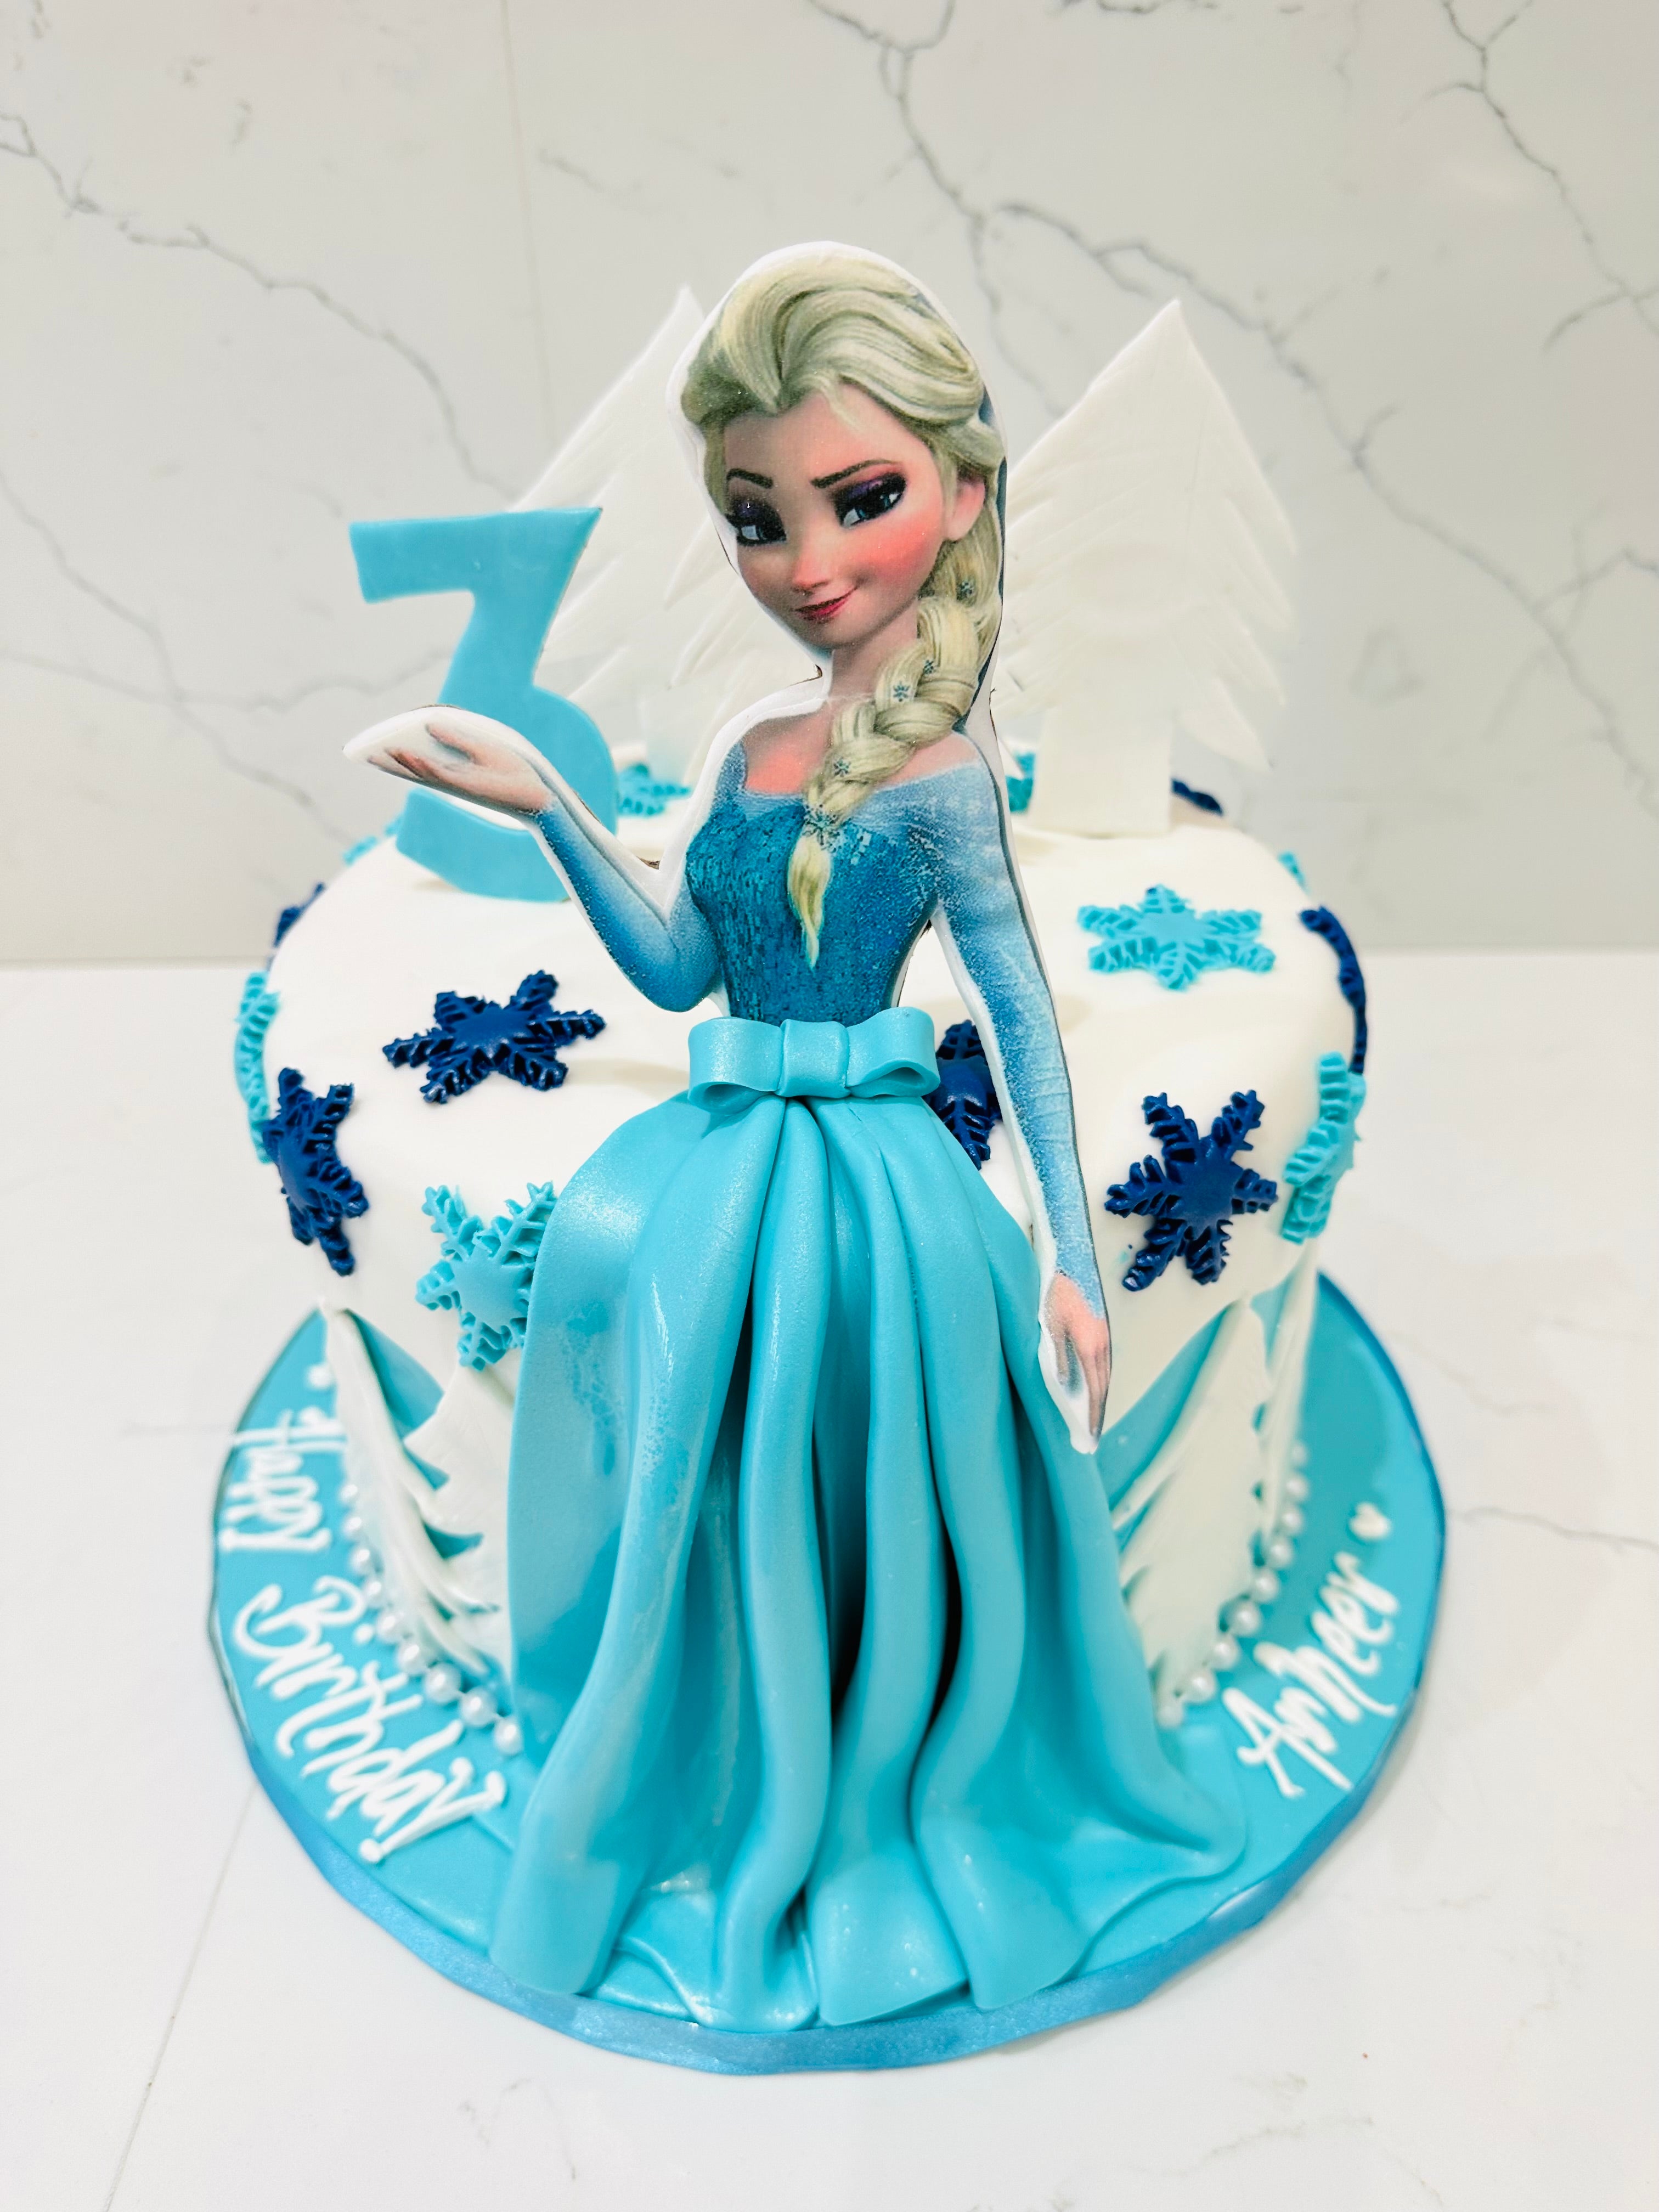 Vintage Style Frozen Cake | Cake Delivery to your Doorstep! - Order Online  | Sydney Delivery